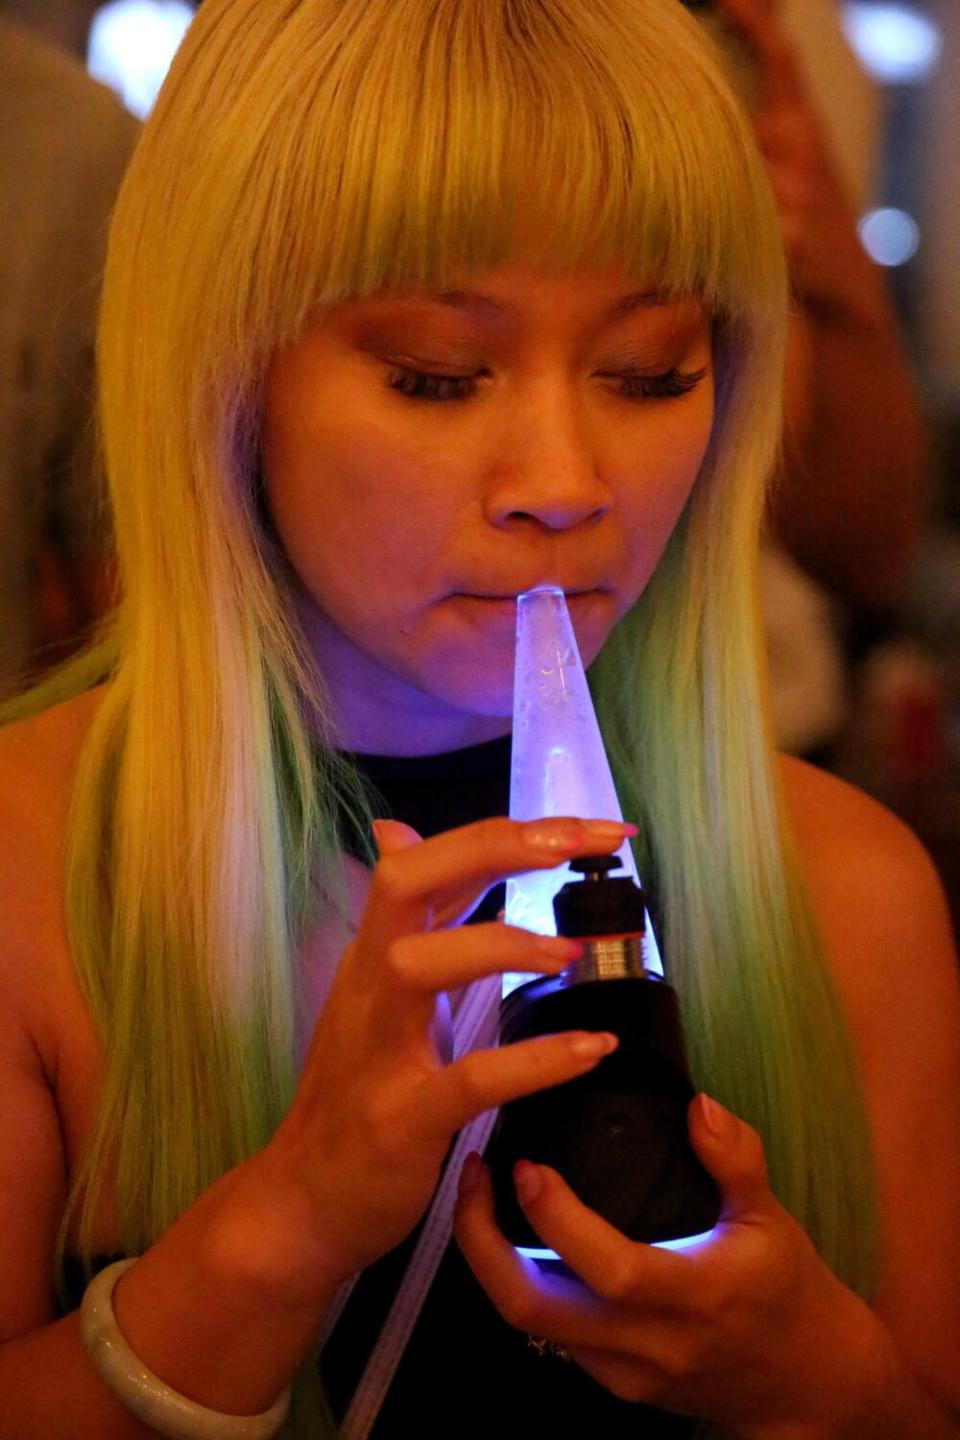 A person inhales from a conical, purple-lit concentrate vaporizer